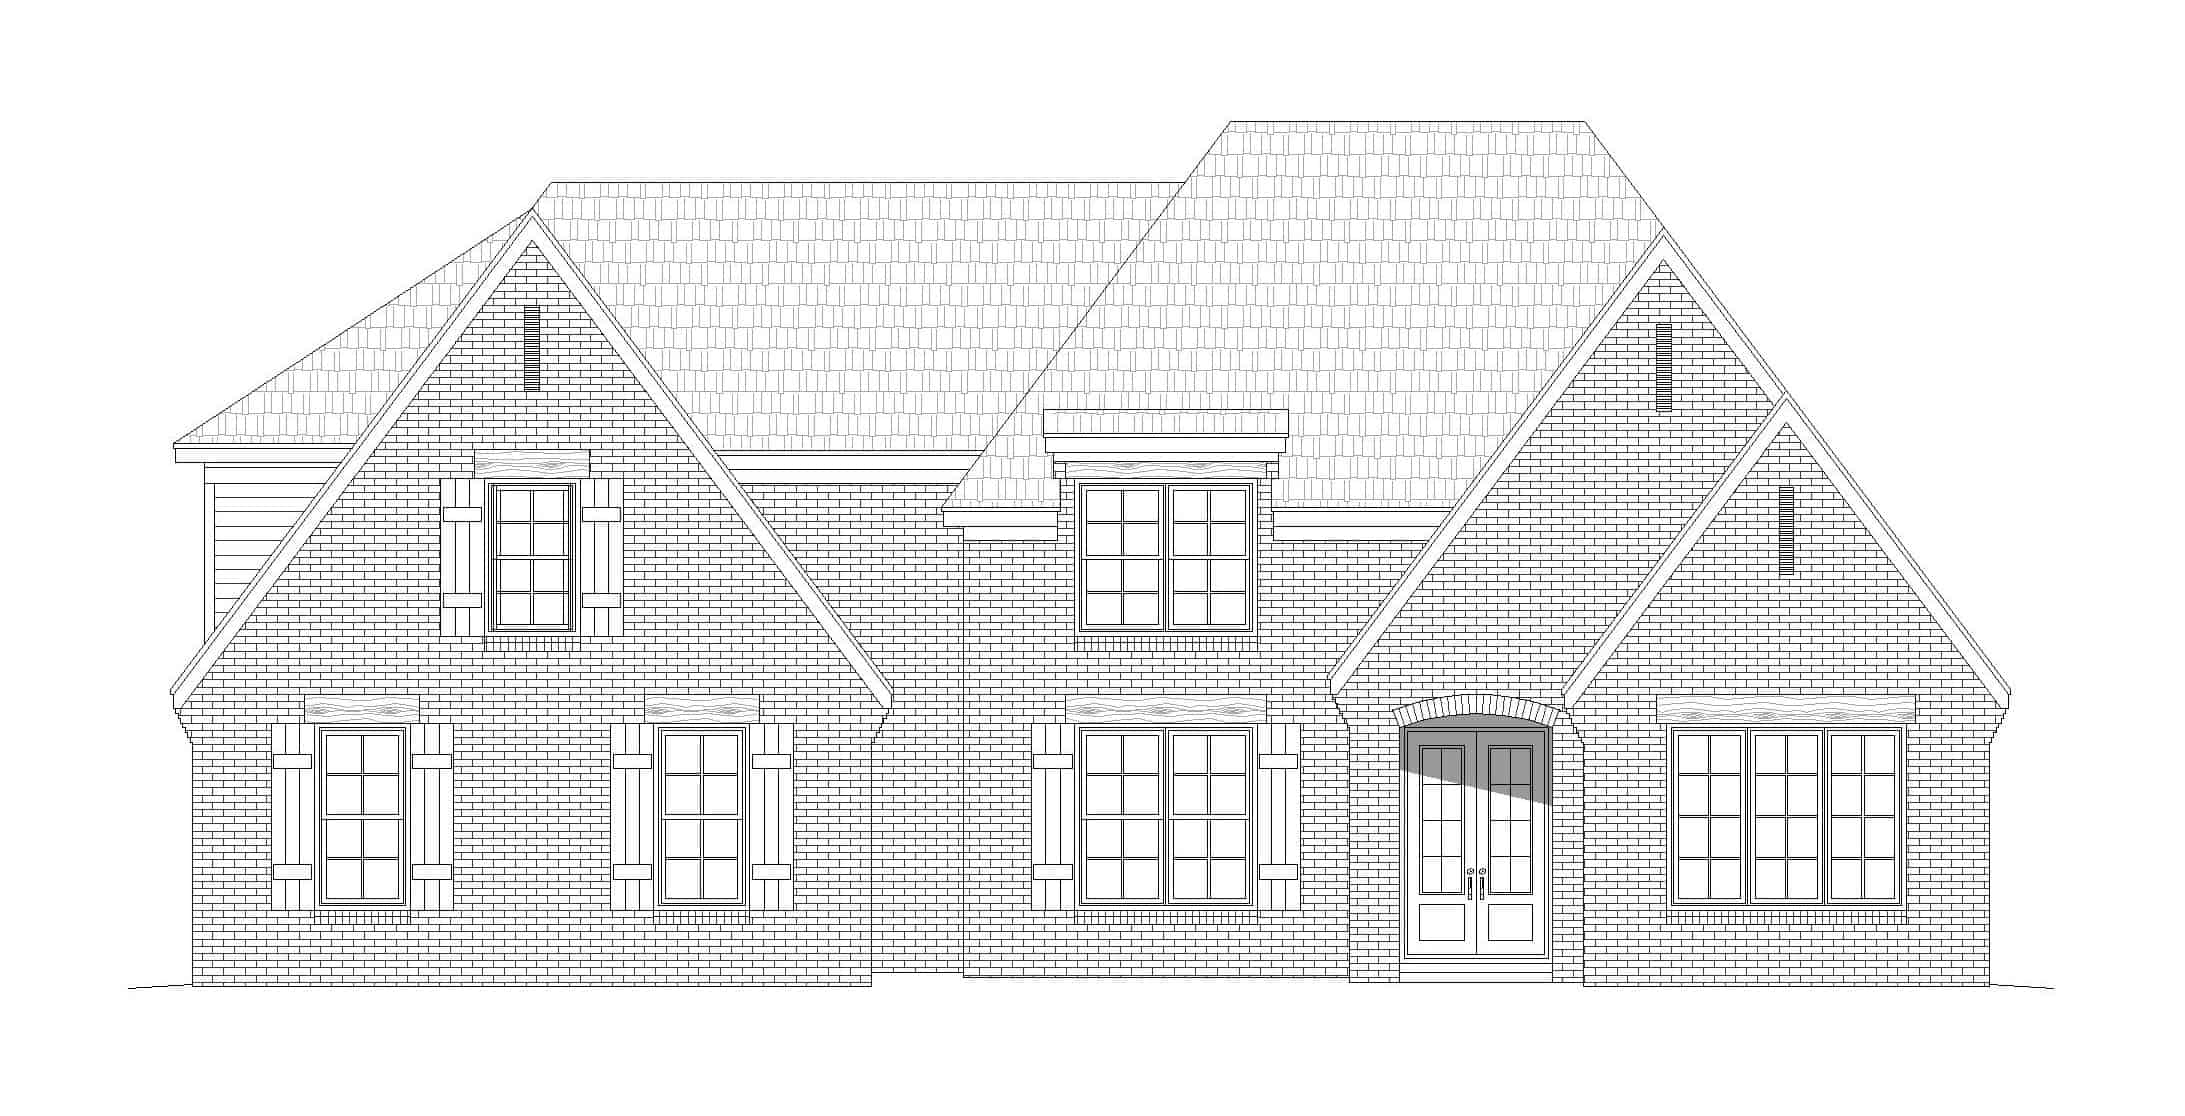 French Style Home - 5 Bedrms, 3.5 Baths - 3781 Sq Ft - Plan #196-1268